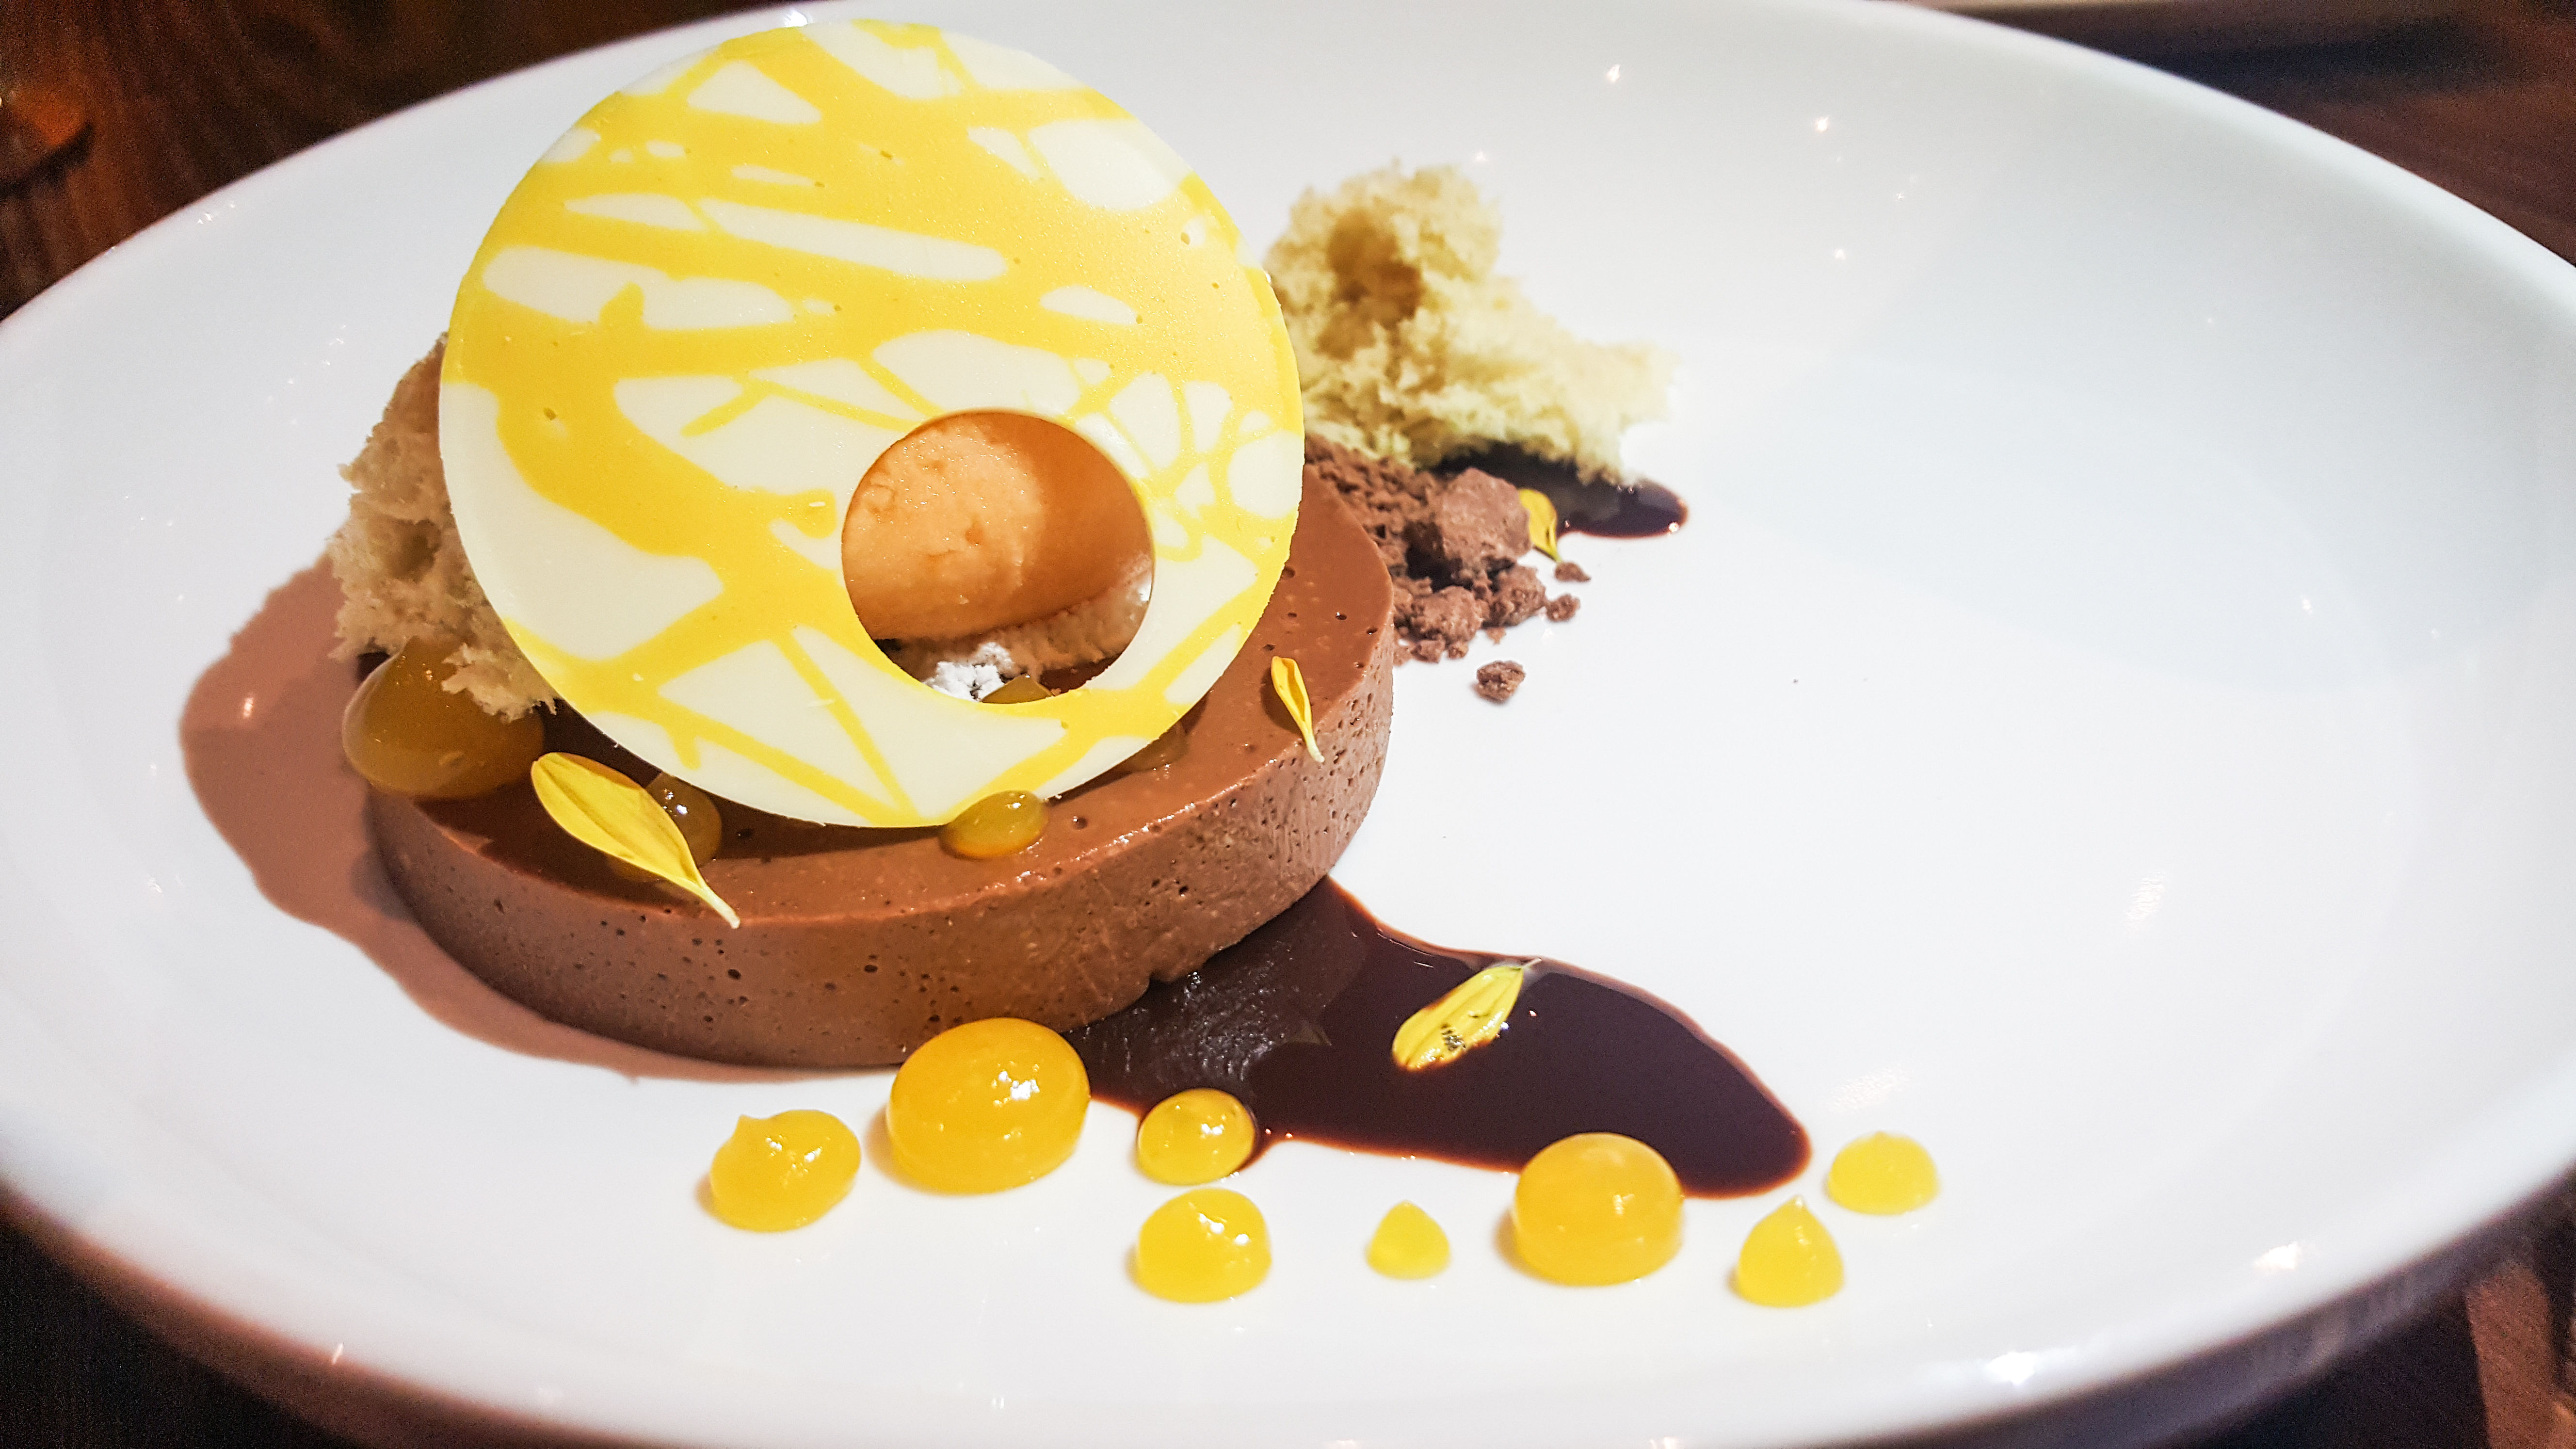 Chocolate and passion fruit custard at Cultivar